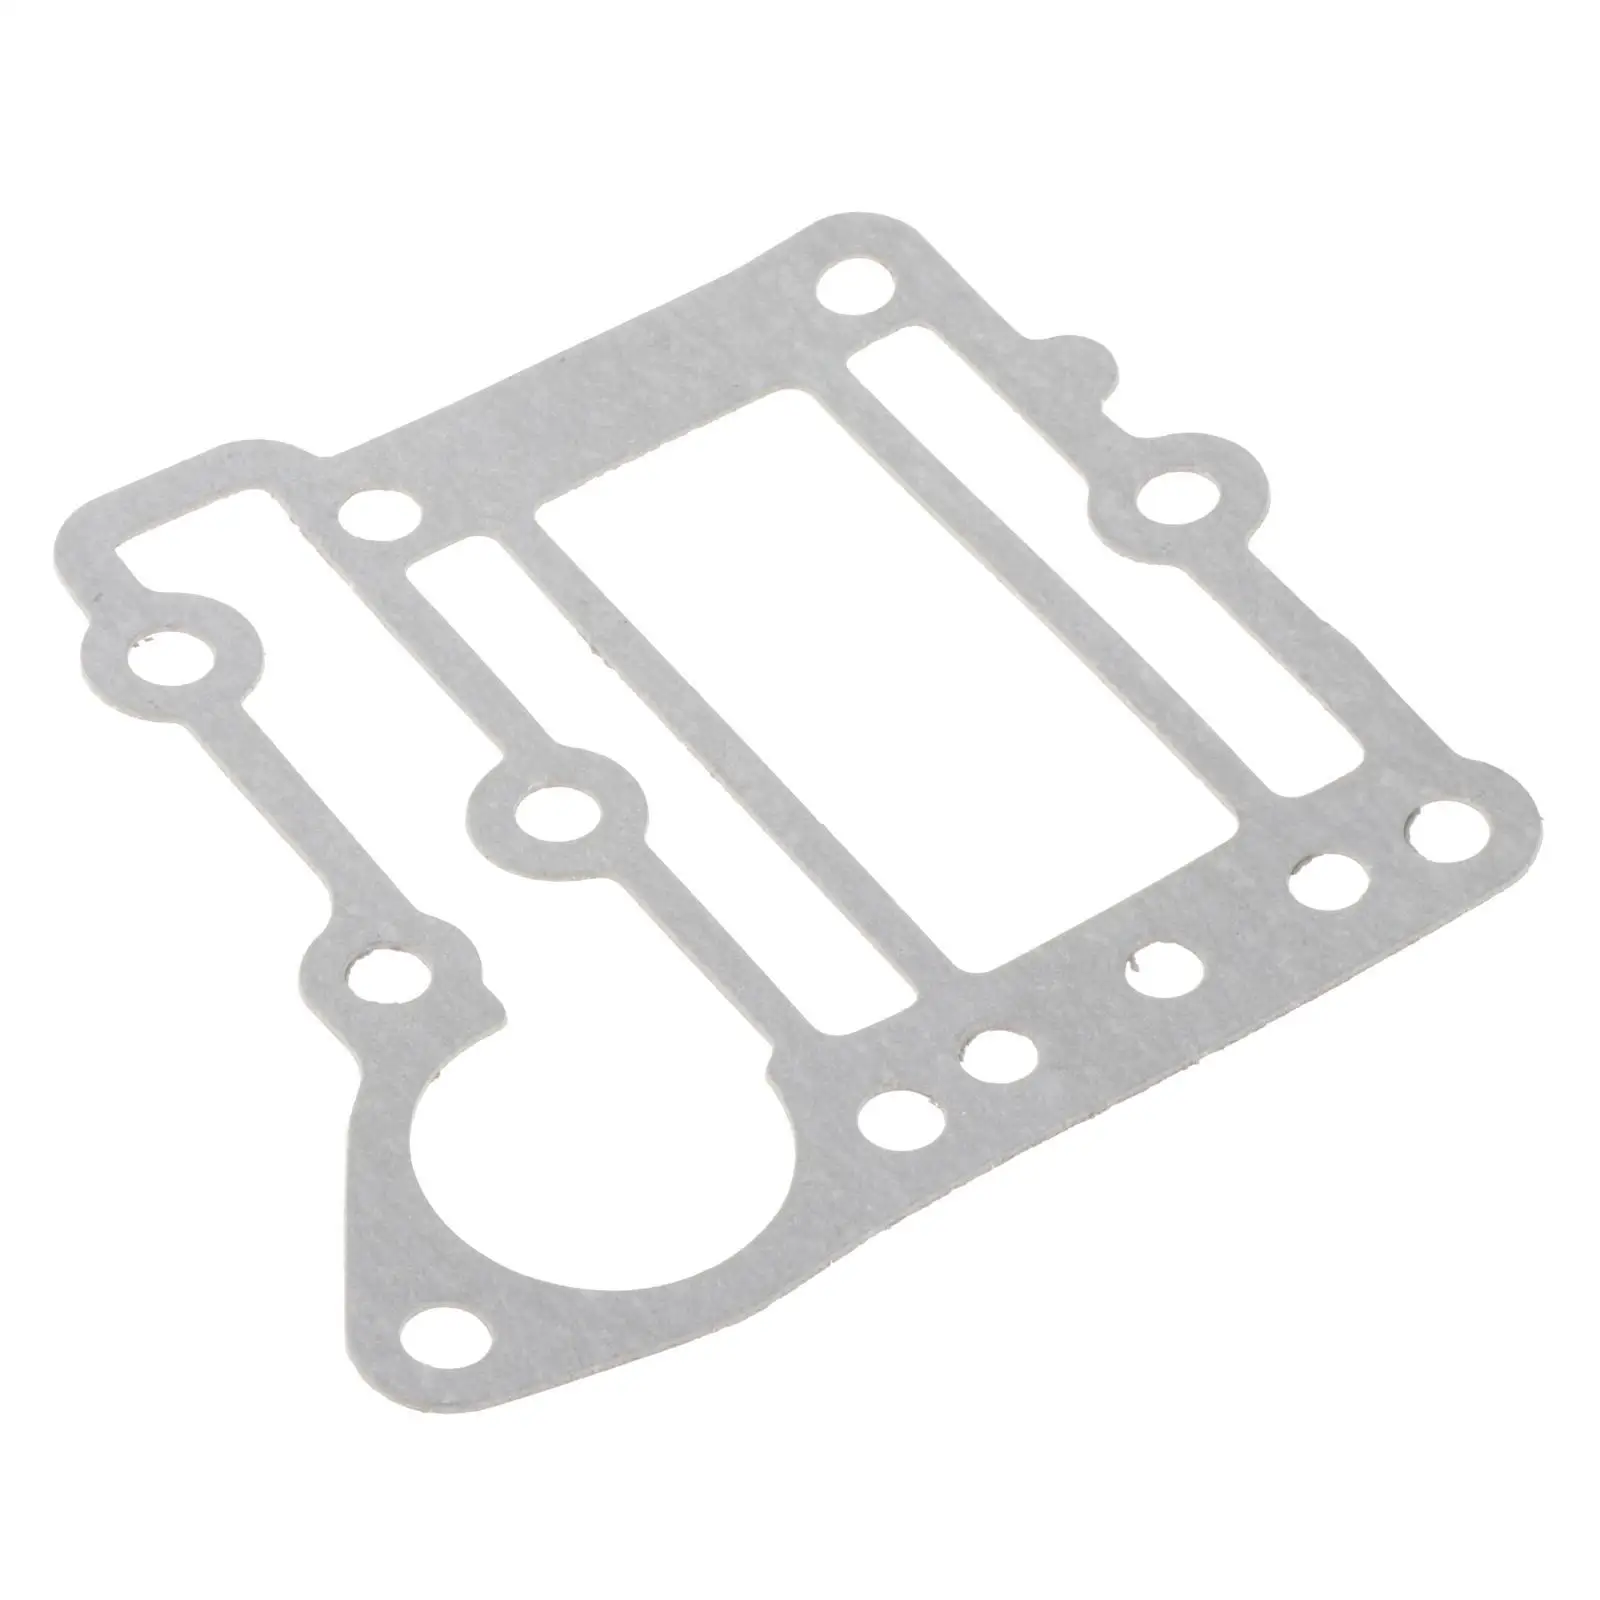 Gasket Outer Cover, 6E3-41114-A1 Outer Exhaust Gasket, Fits for Yamaha 5HP Outboard